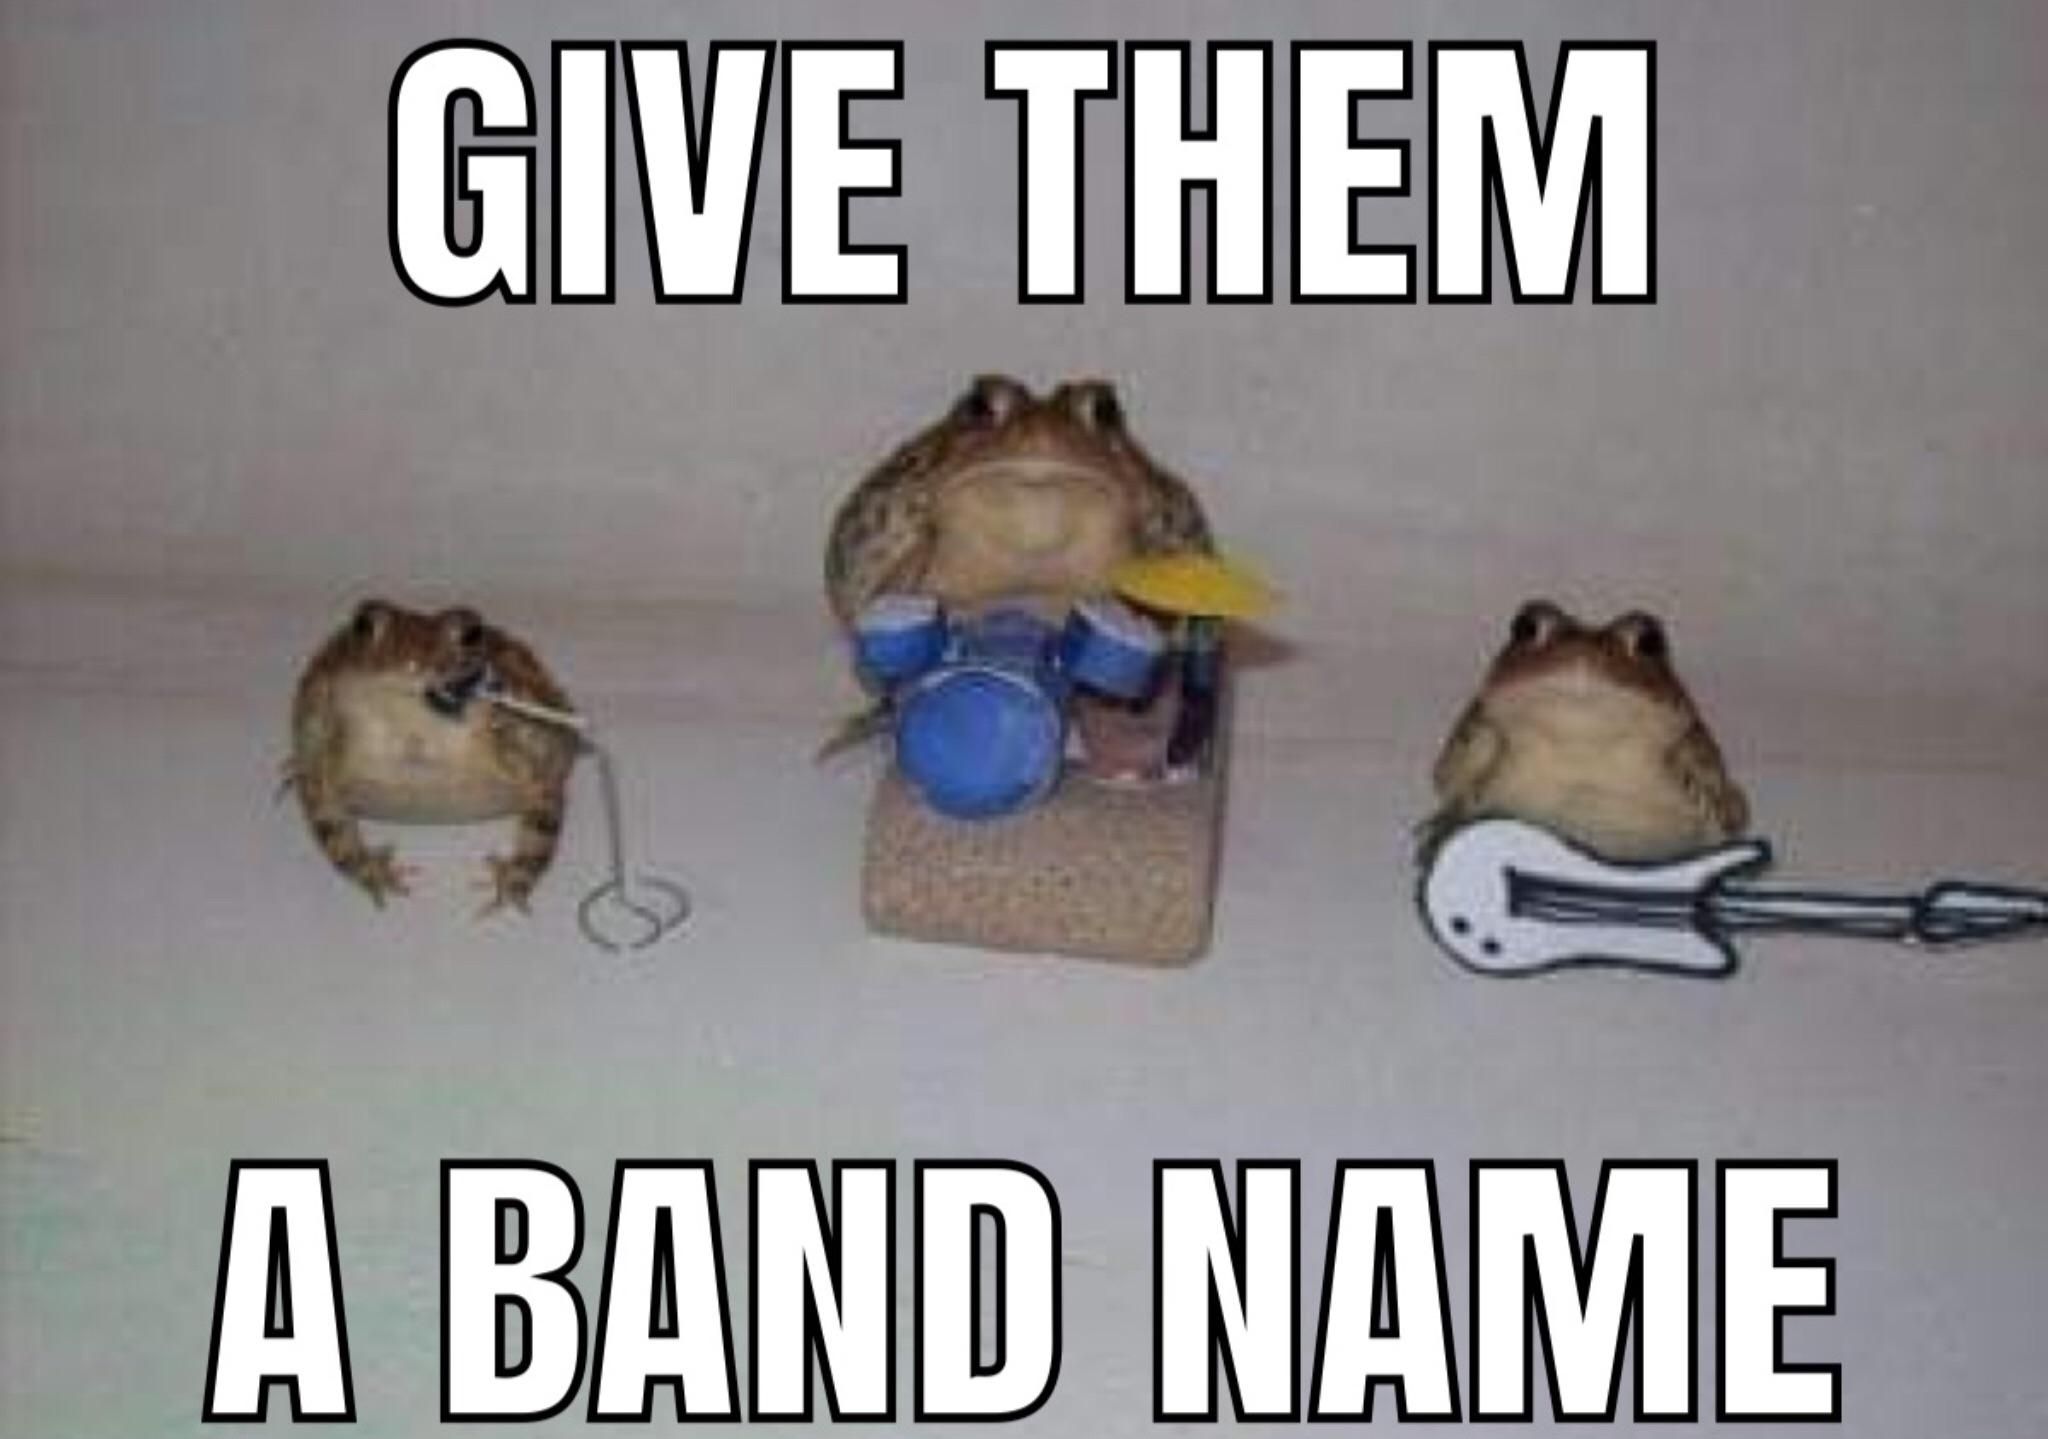 What band are they?